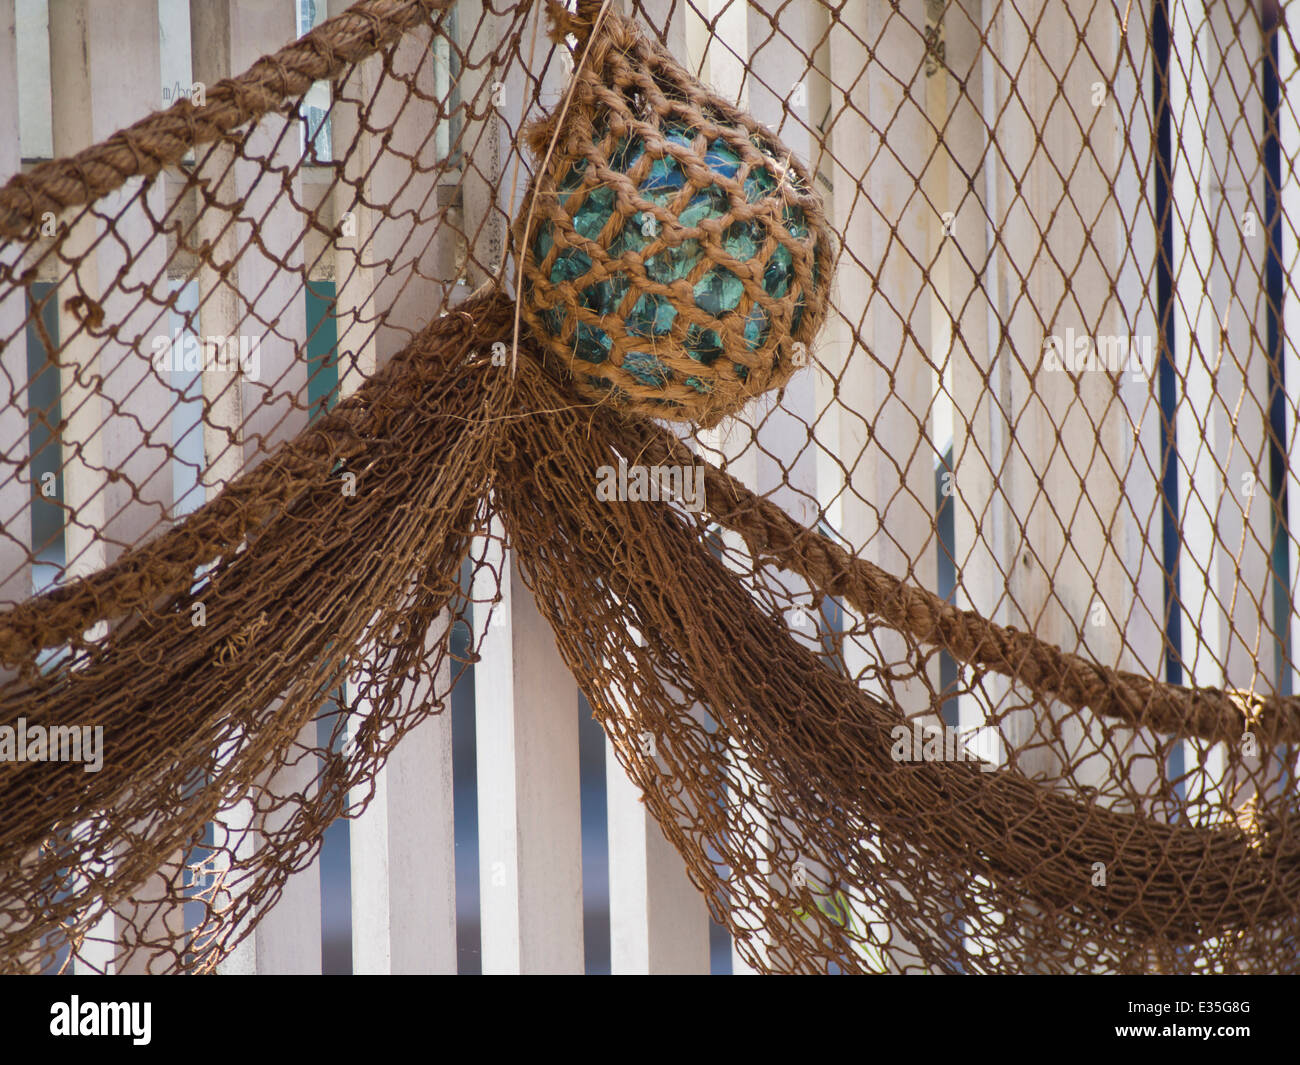 Glass float and fishing net on a picket fence, rustic decoration